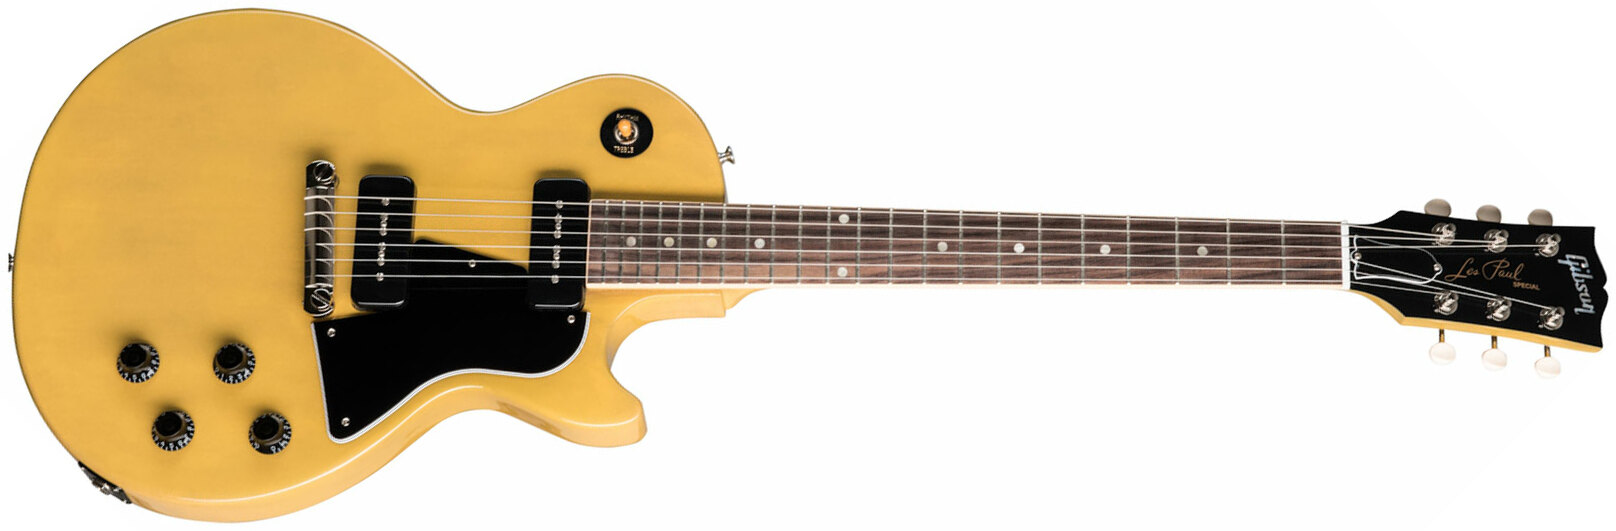 Gibson Les Paul Special Original 2p90 Ht Rw - Tv Yellow - Single cut electric guitar - Main picture